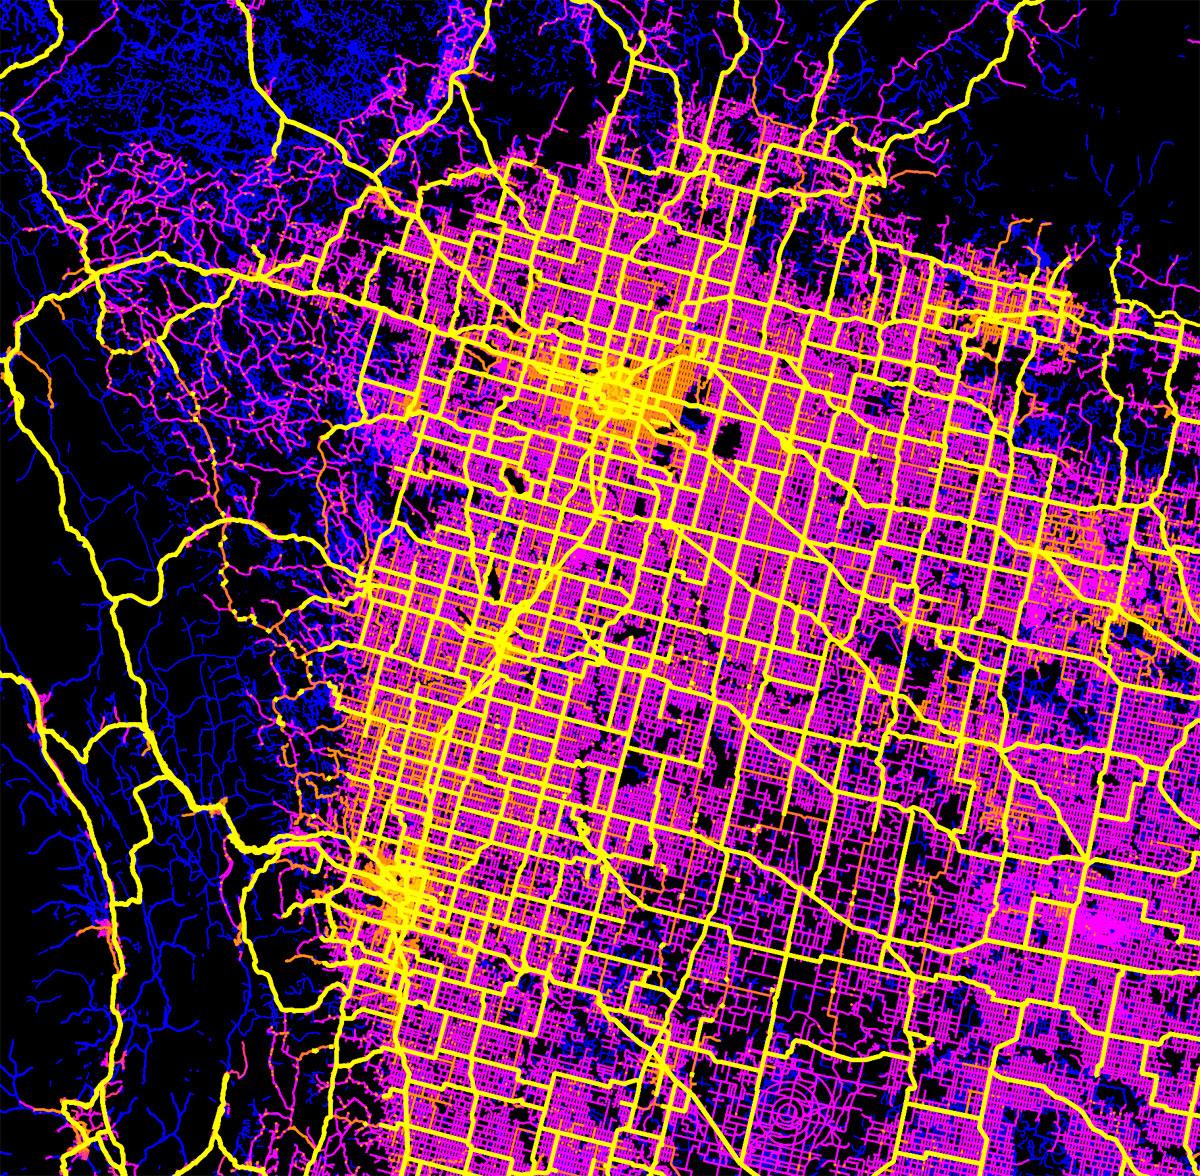 canada mapped by trails roads streets and highways by robbi bishop taylor 4 Canada Mapped by Trails, Roads, Streets and Highways